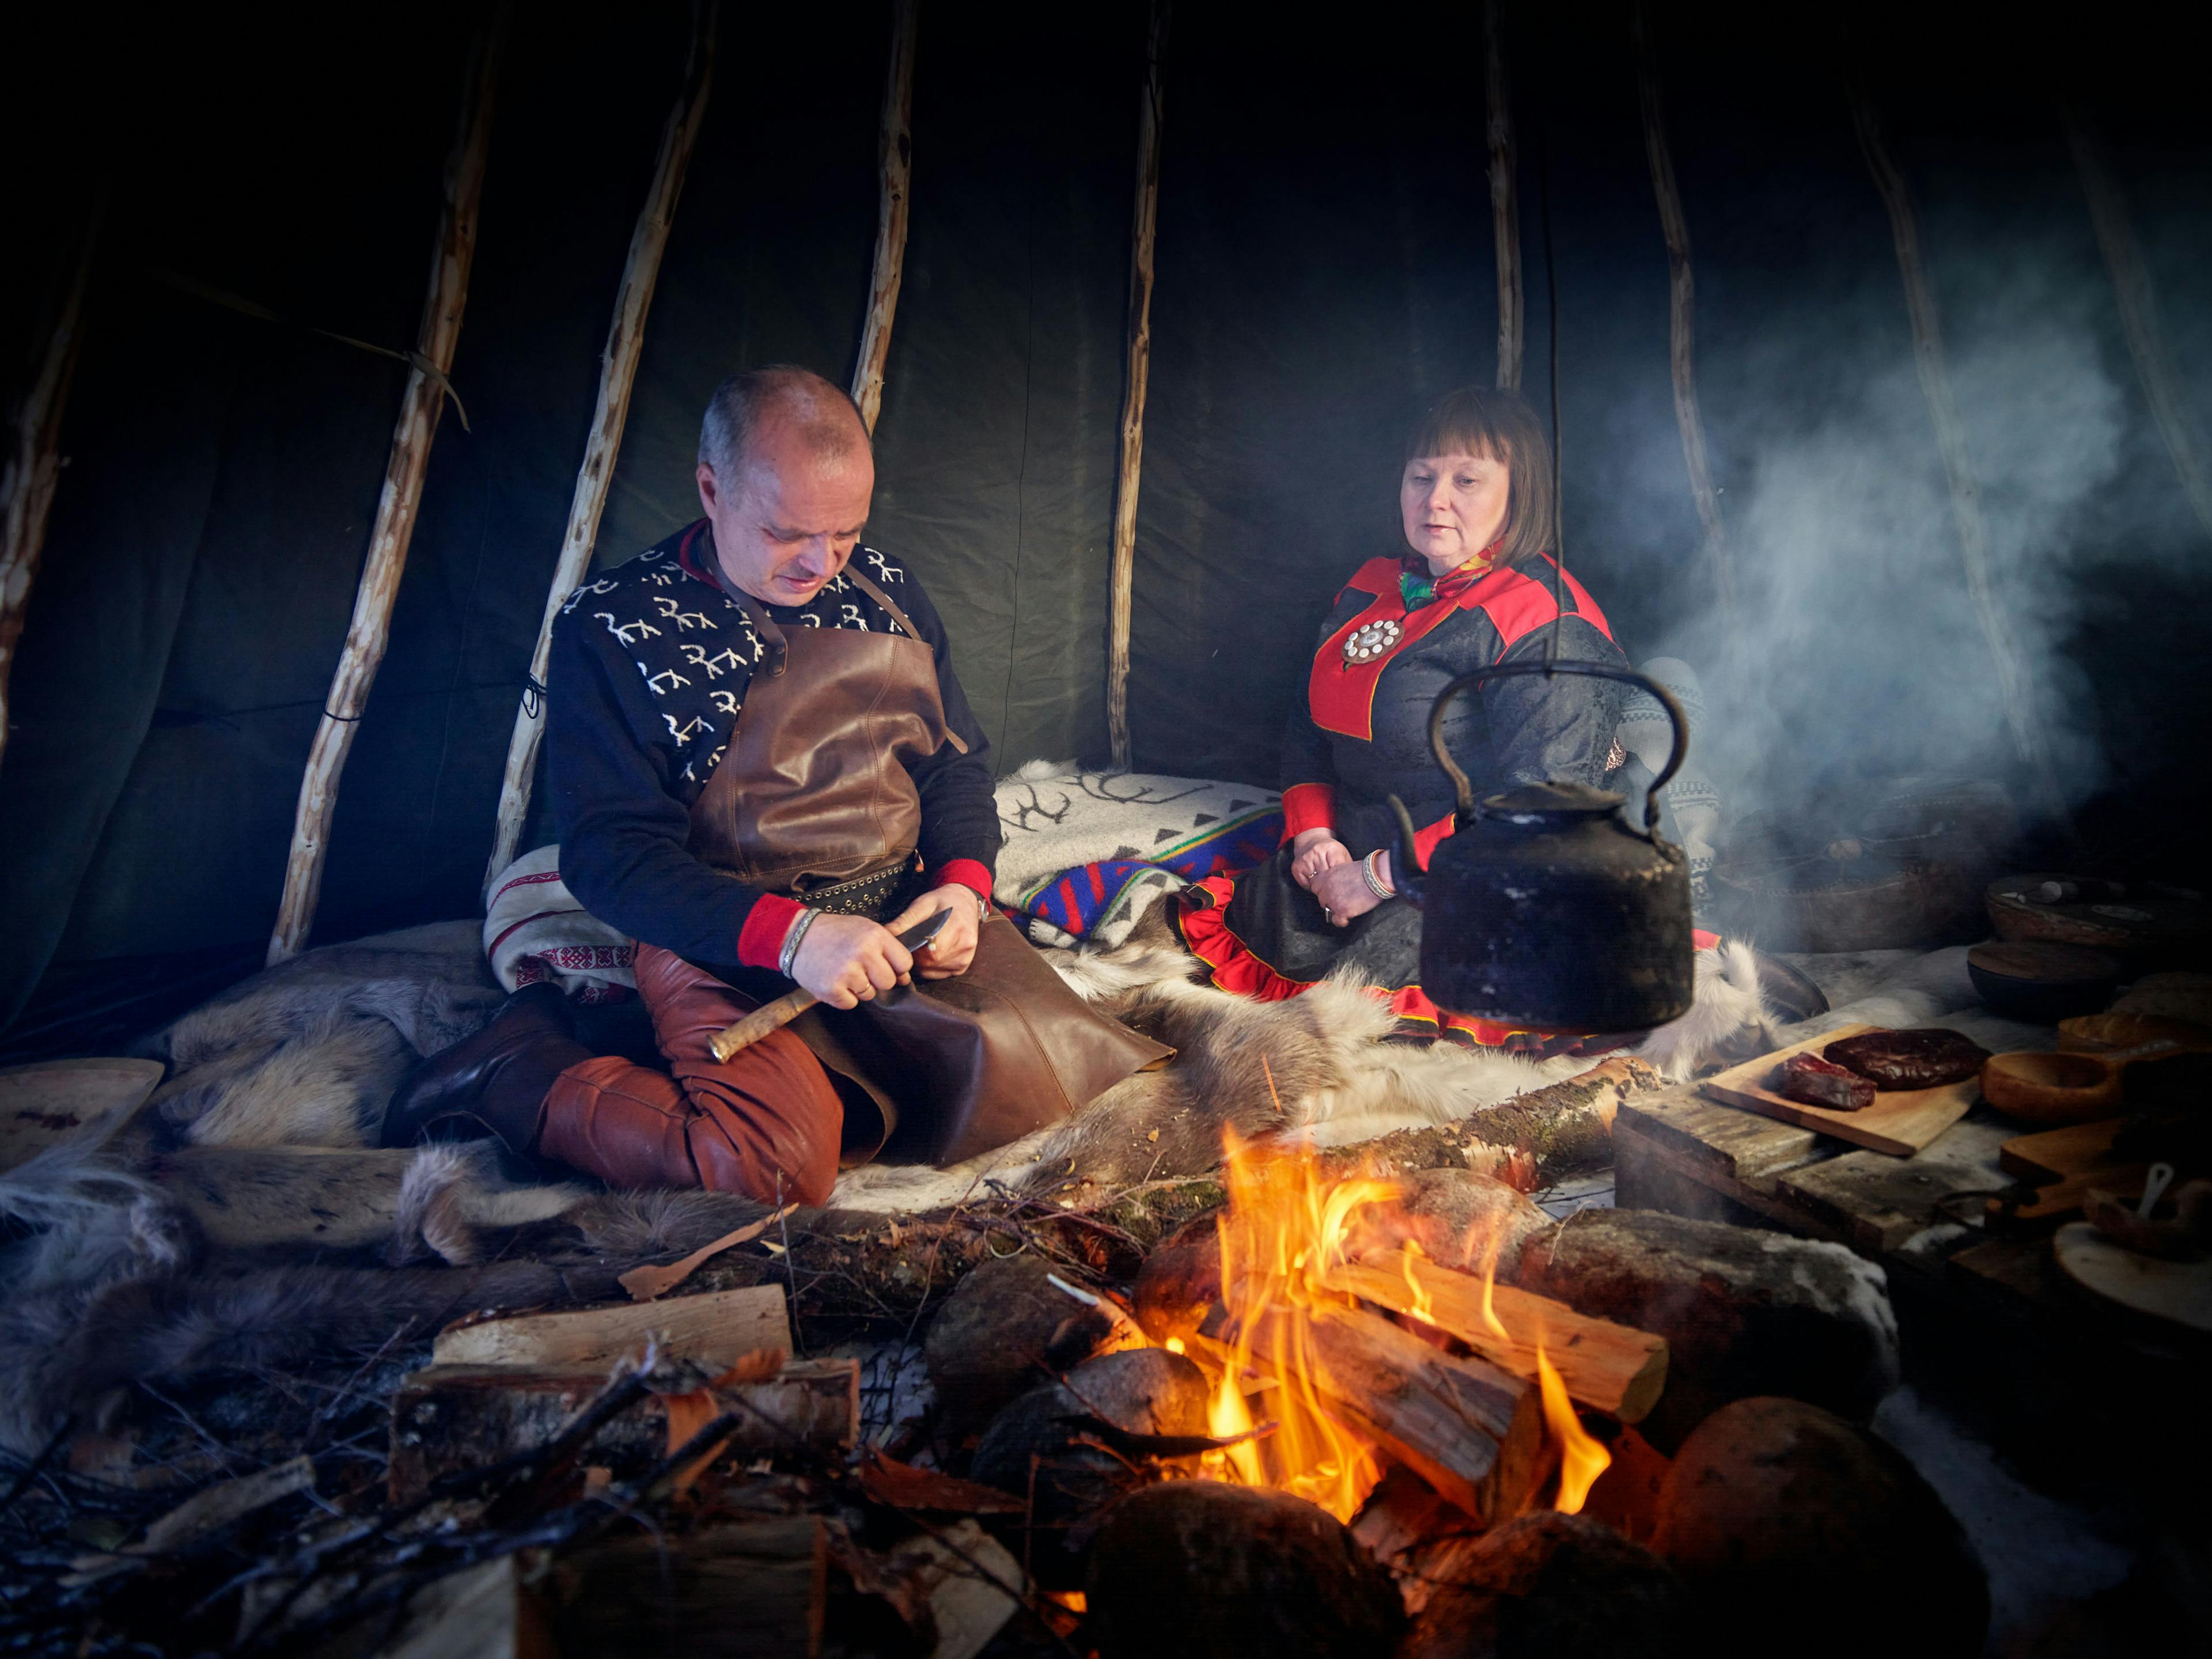 A Sami couple in front of the fire